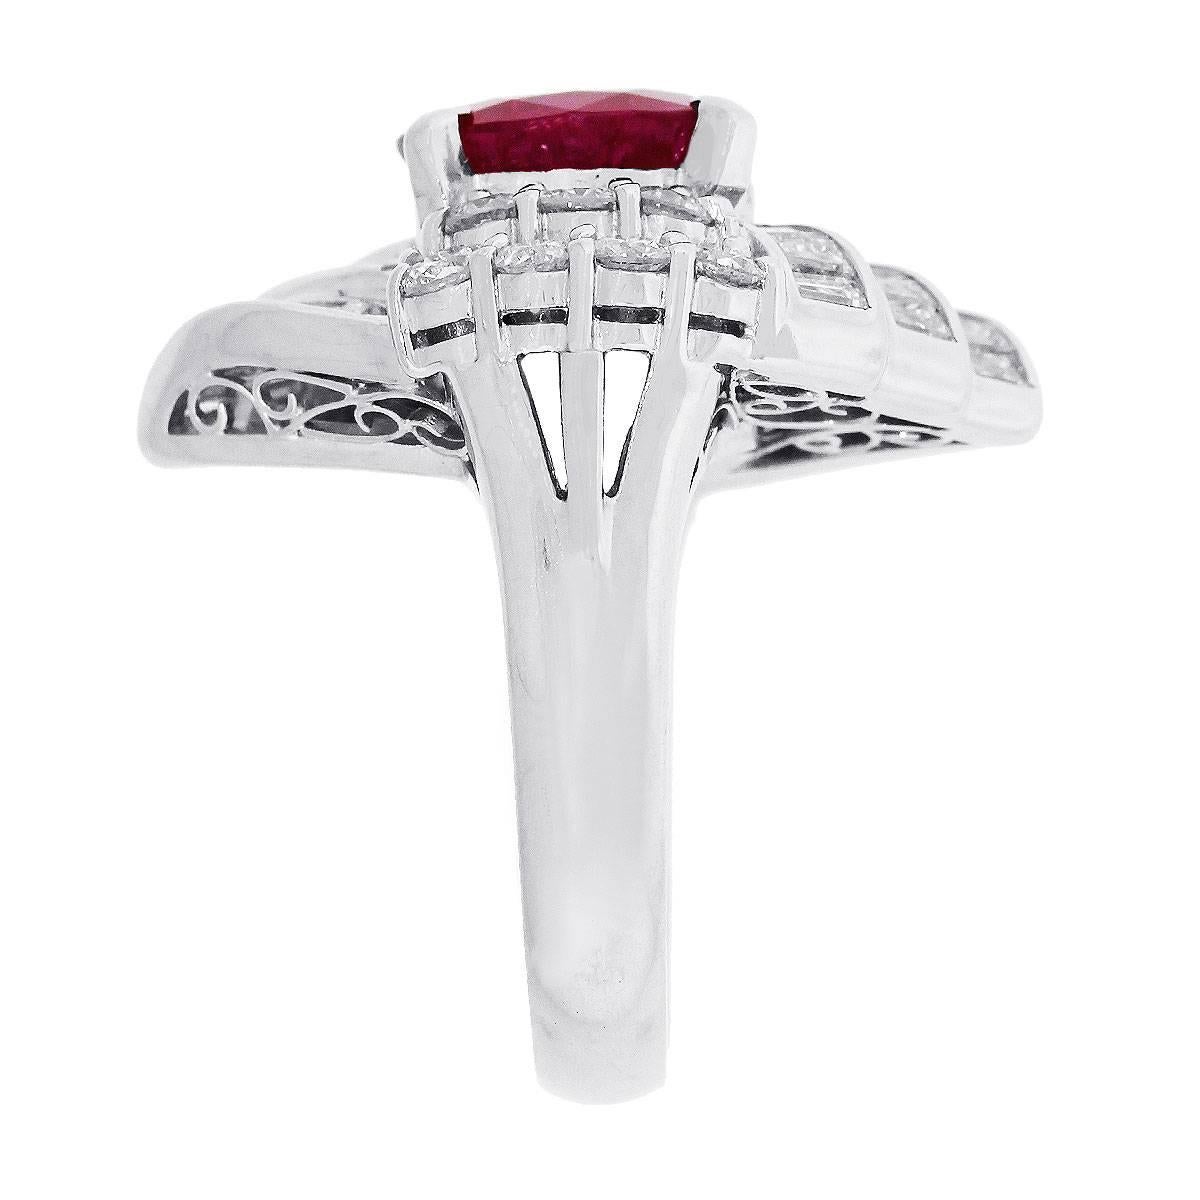 Material: Platinum
Gemstone Details: Approximately 3.97ct cushion cut ruby.
Diamond Details: Approximately 1.84ctw round brilliant and baguette shape diamonds. Diamonds are G/H in color and VS in clarity
Ring Size: 5.75 (can be sized)
Ring